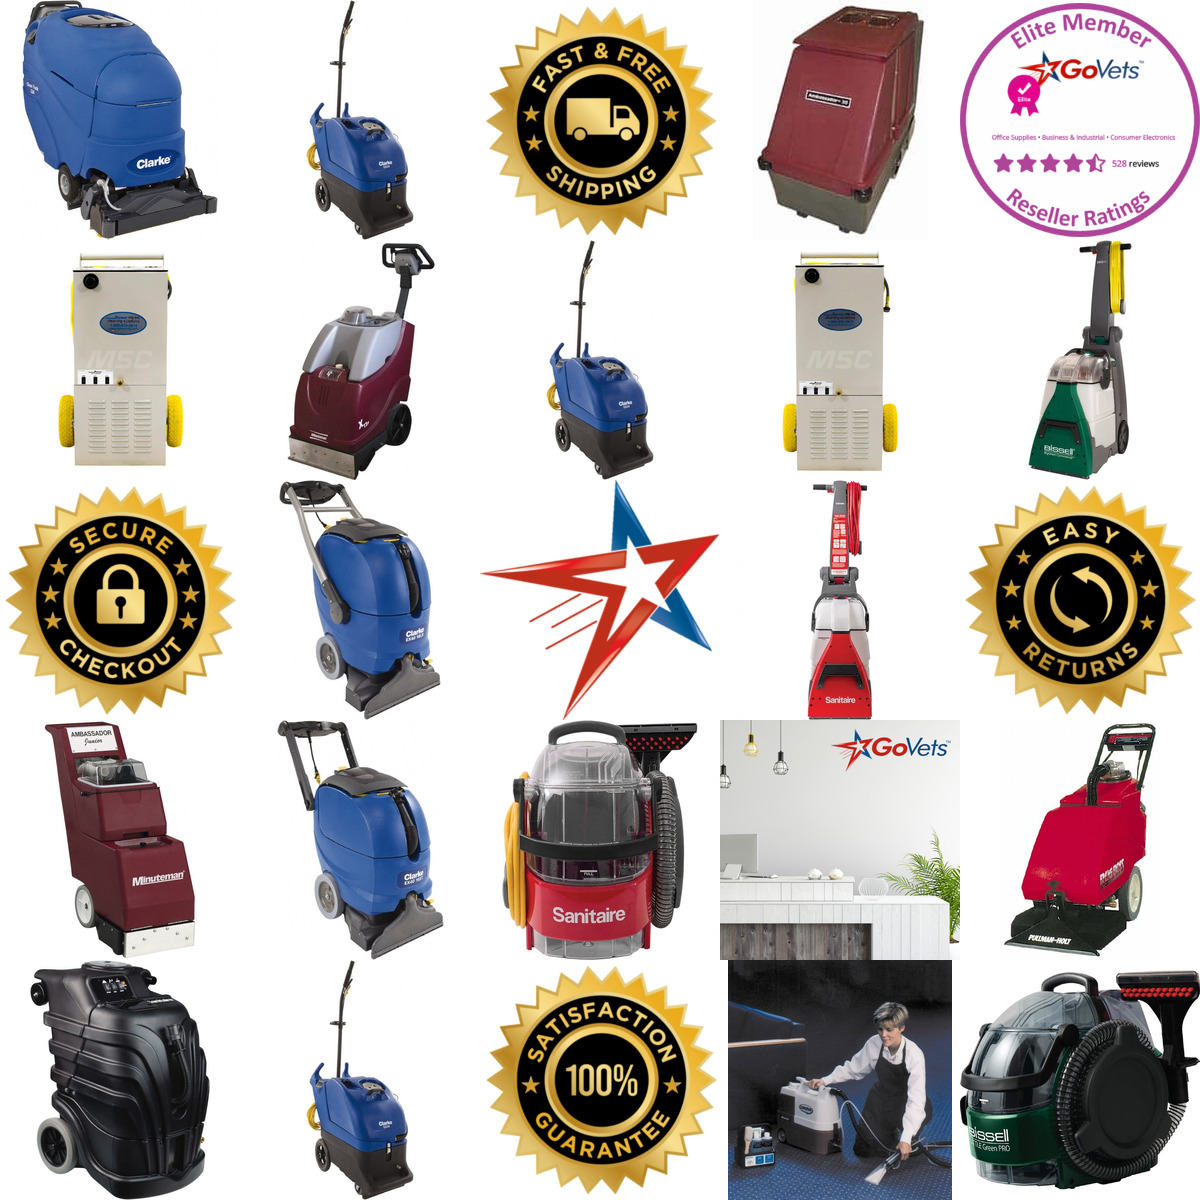 A selection of Carpet Cleaning Machines and Extractors products on GoVets